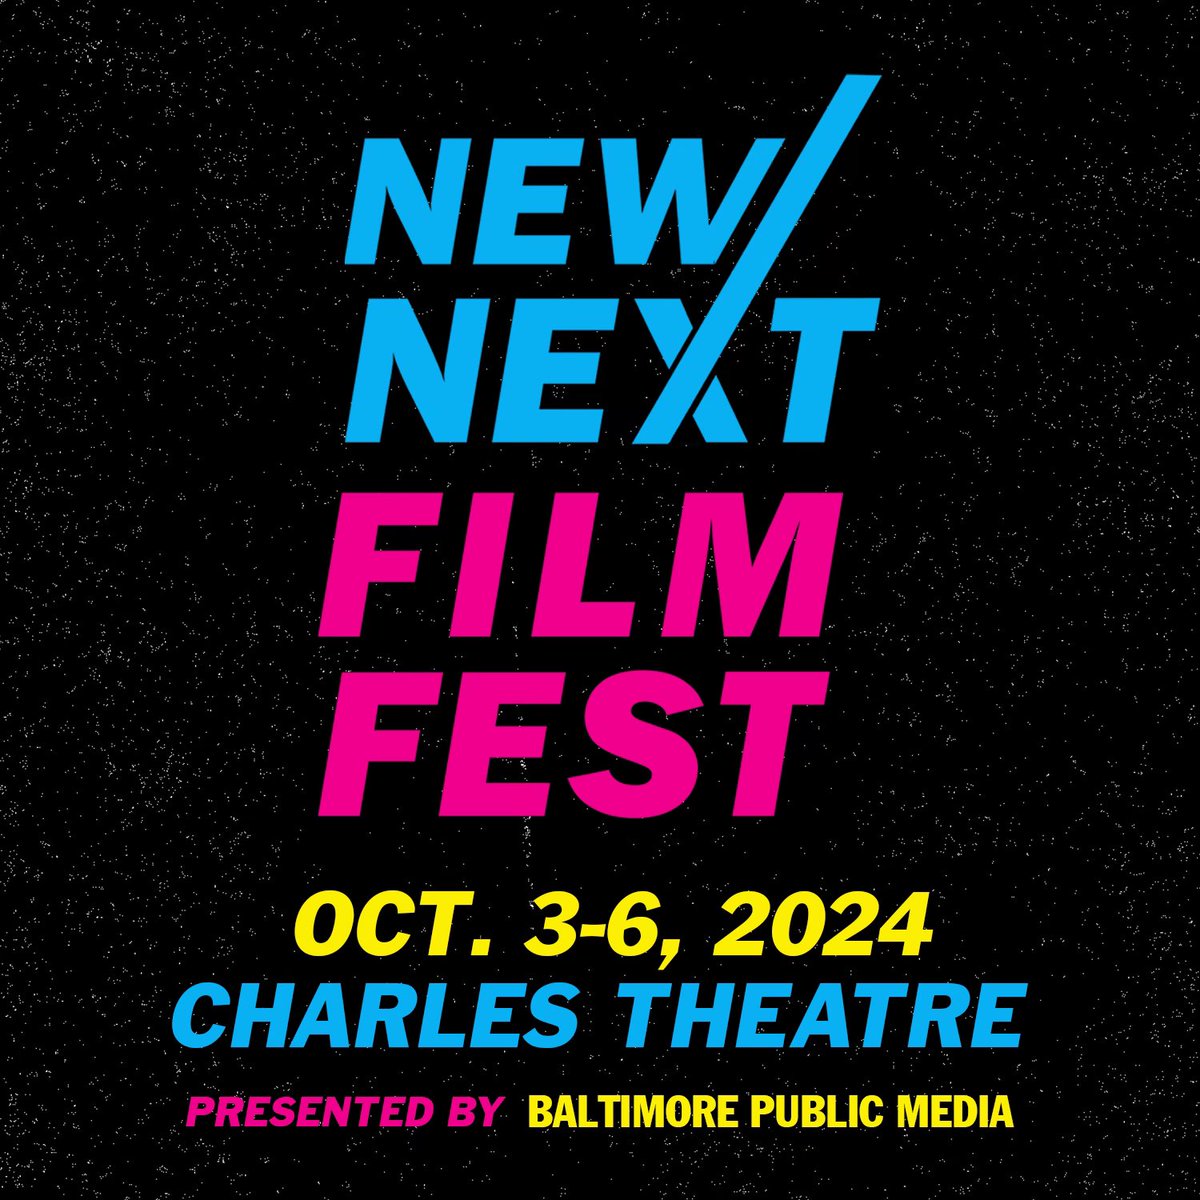 Save the dates: New/Next 2.0 is coming, Oct 3-6 at The Charles. …and send us your films to consider! Our call for entries is now live via FilmFreeway: newnextfilmfest.com/submissions